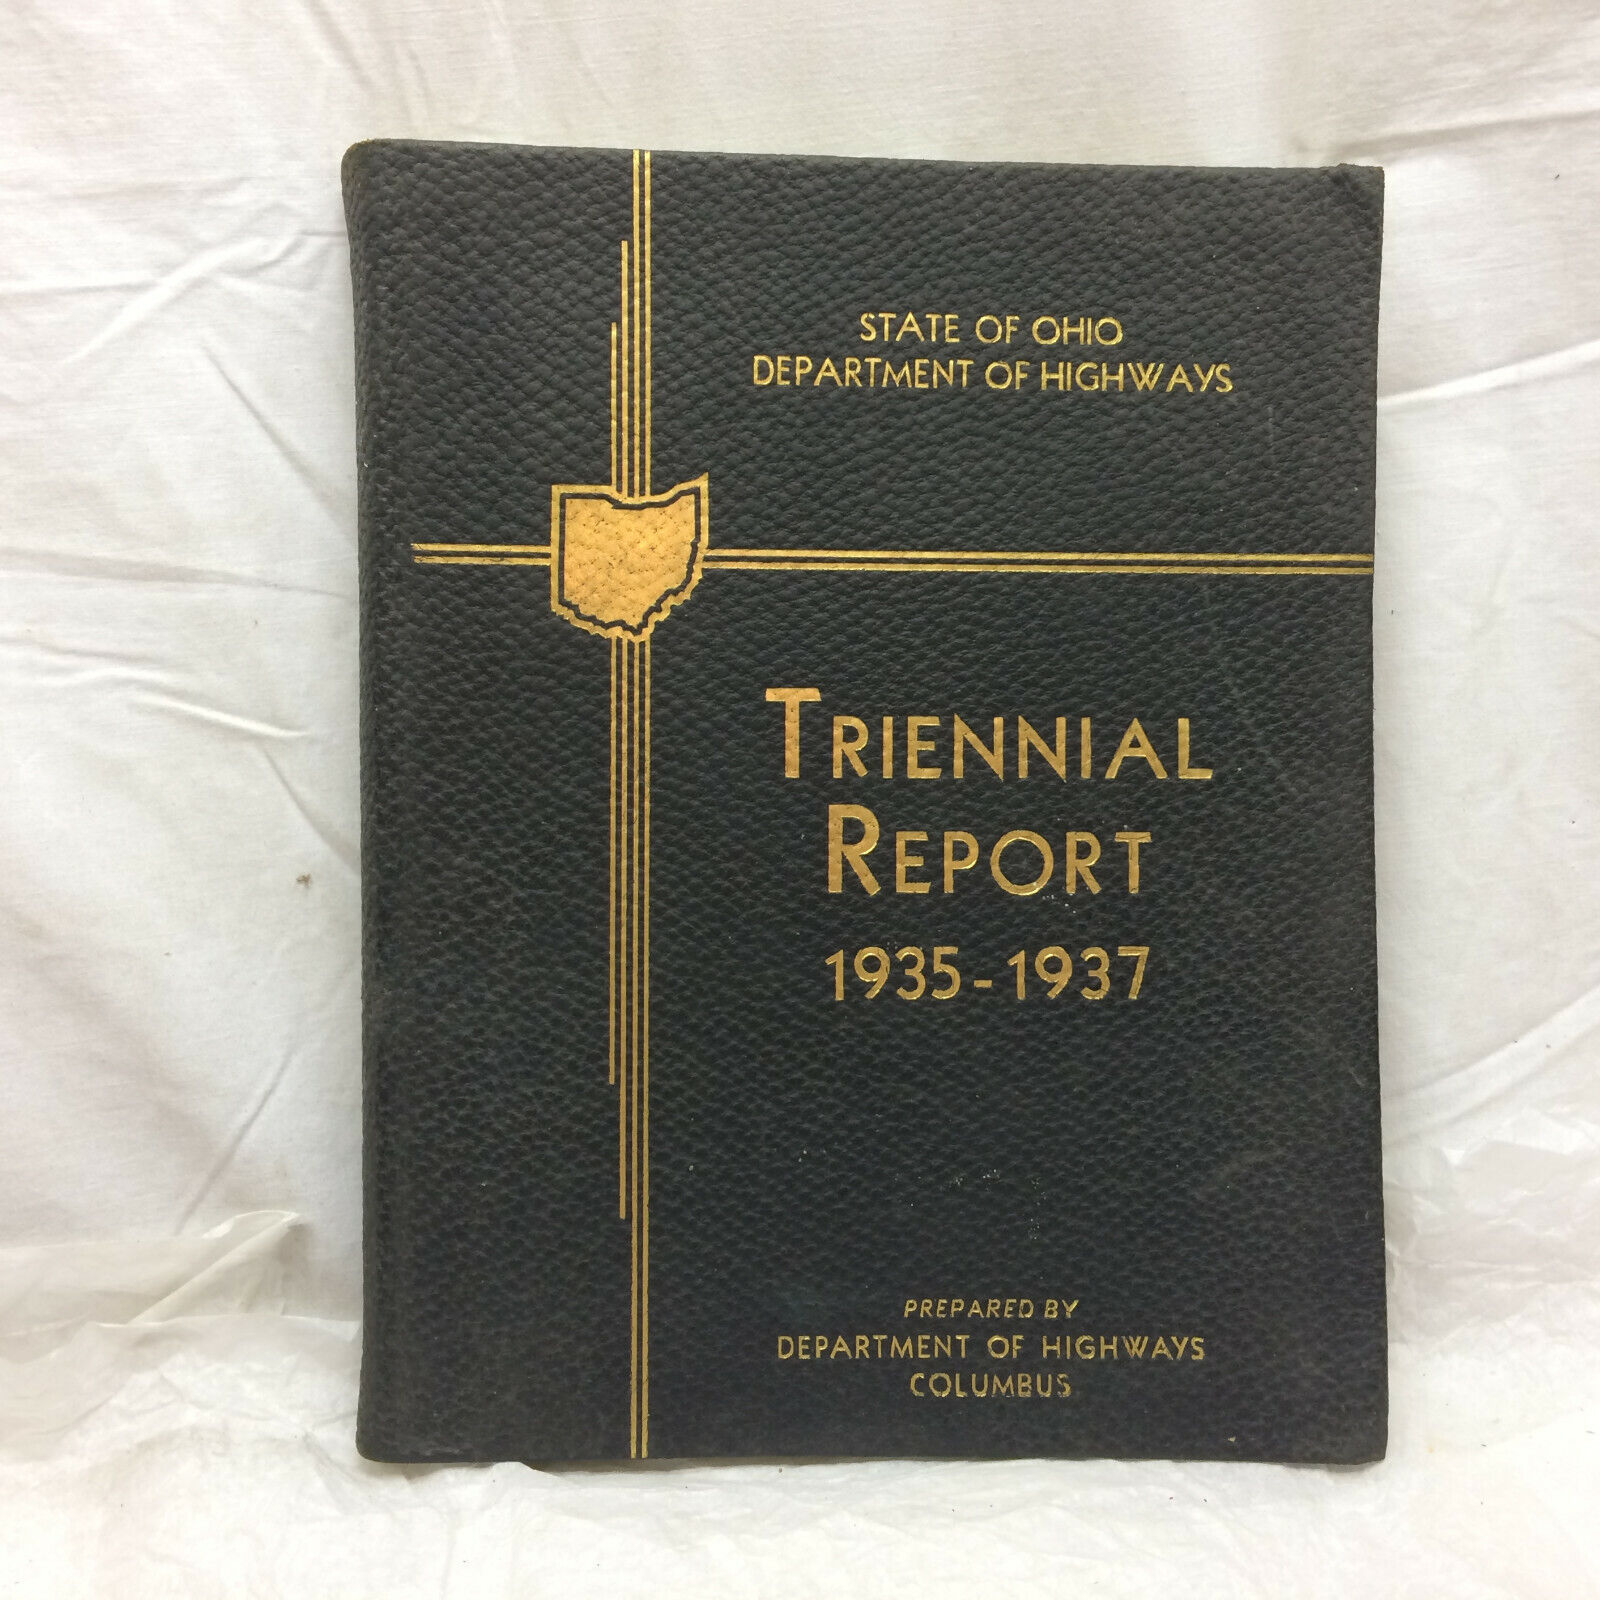 Vintage 1935-37 Triennial Report Book State of Ohio Department of Highways